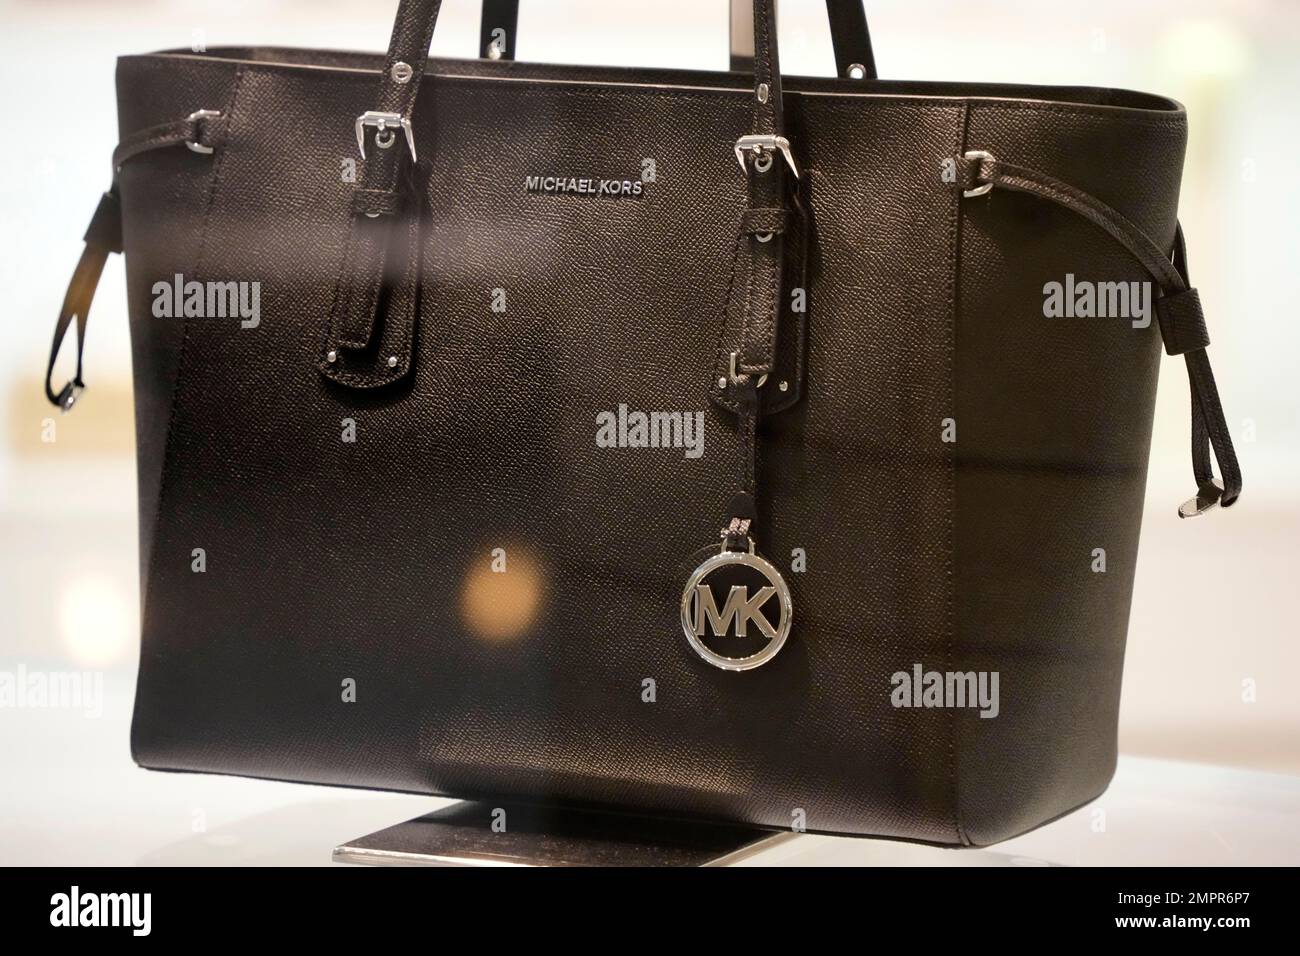 BAG ON DISPLAY AT MICHAEL KORS BOUTIQUE IN CONDOTTI STREET Stock Photo -  Alamy